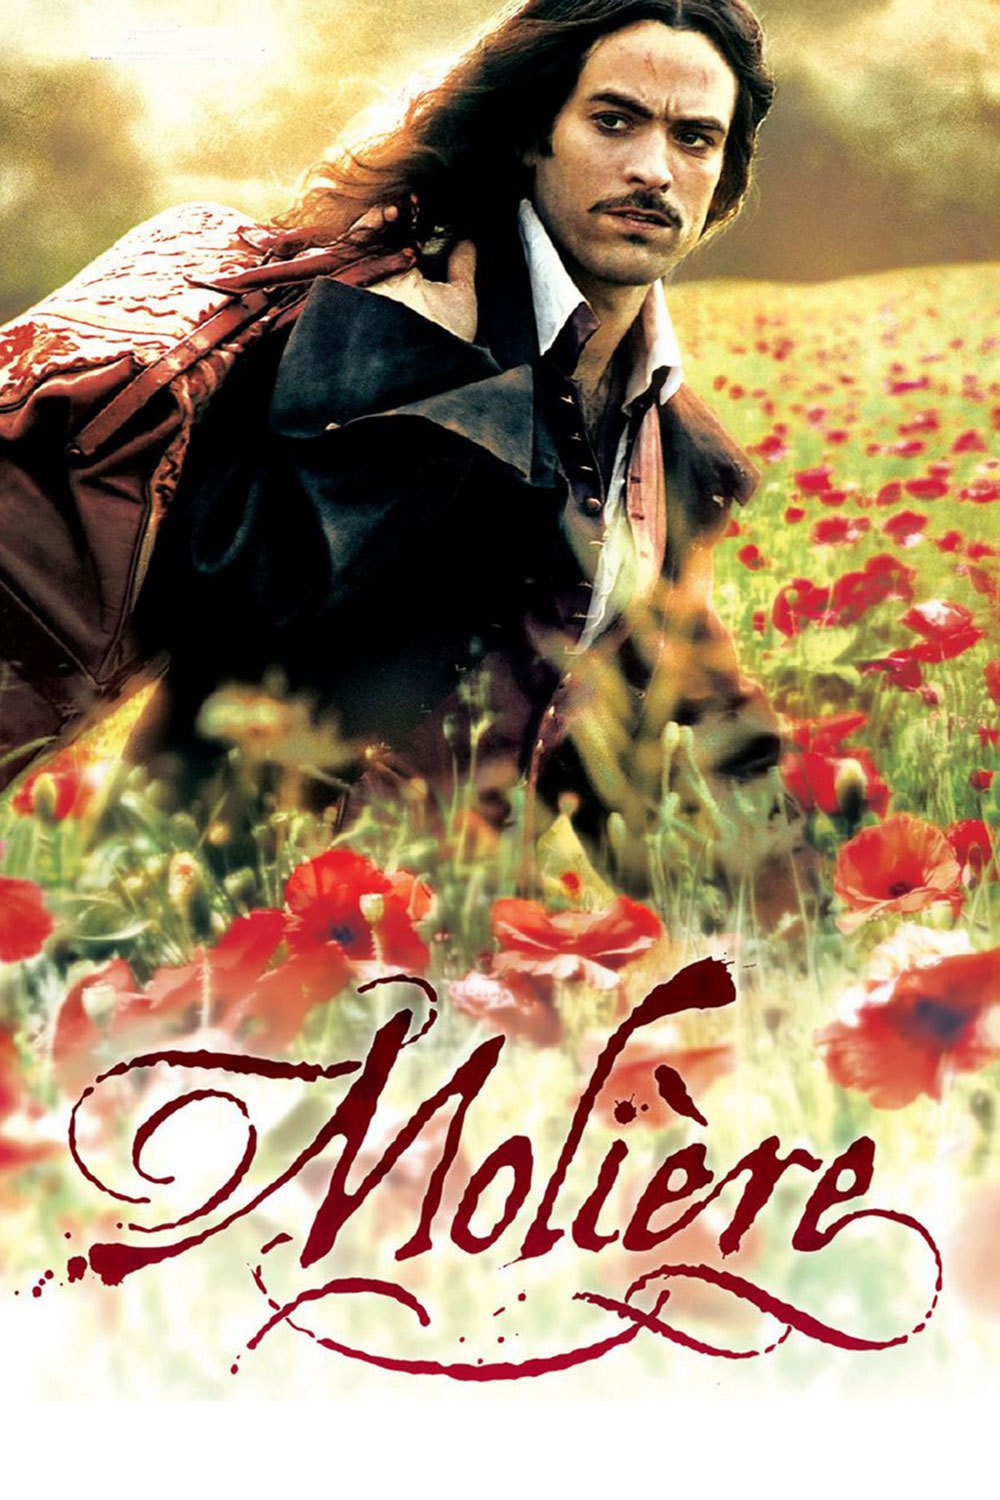 Poster for the movie "Moliere"